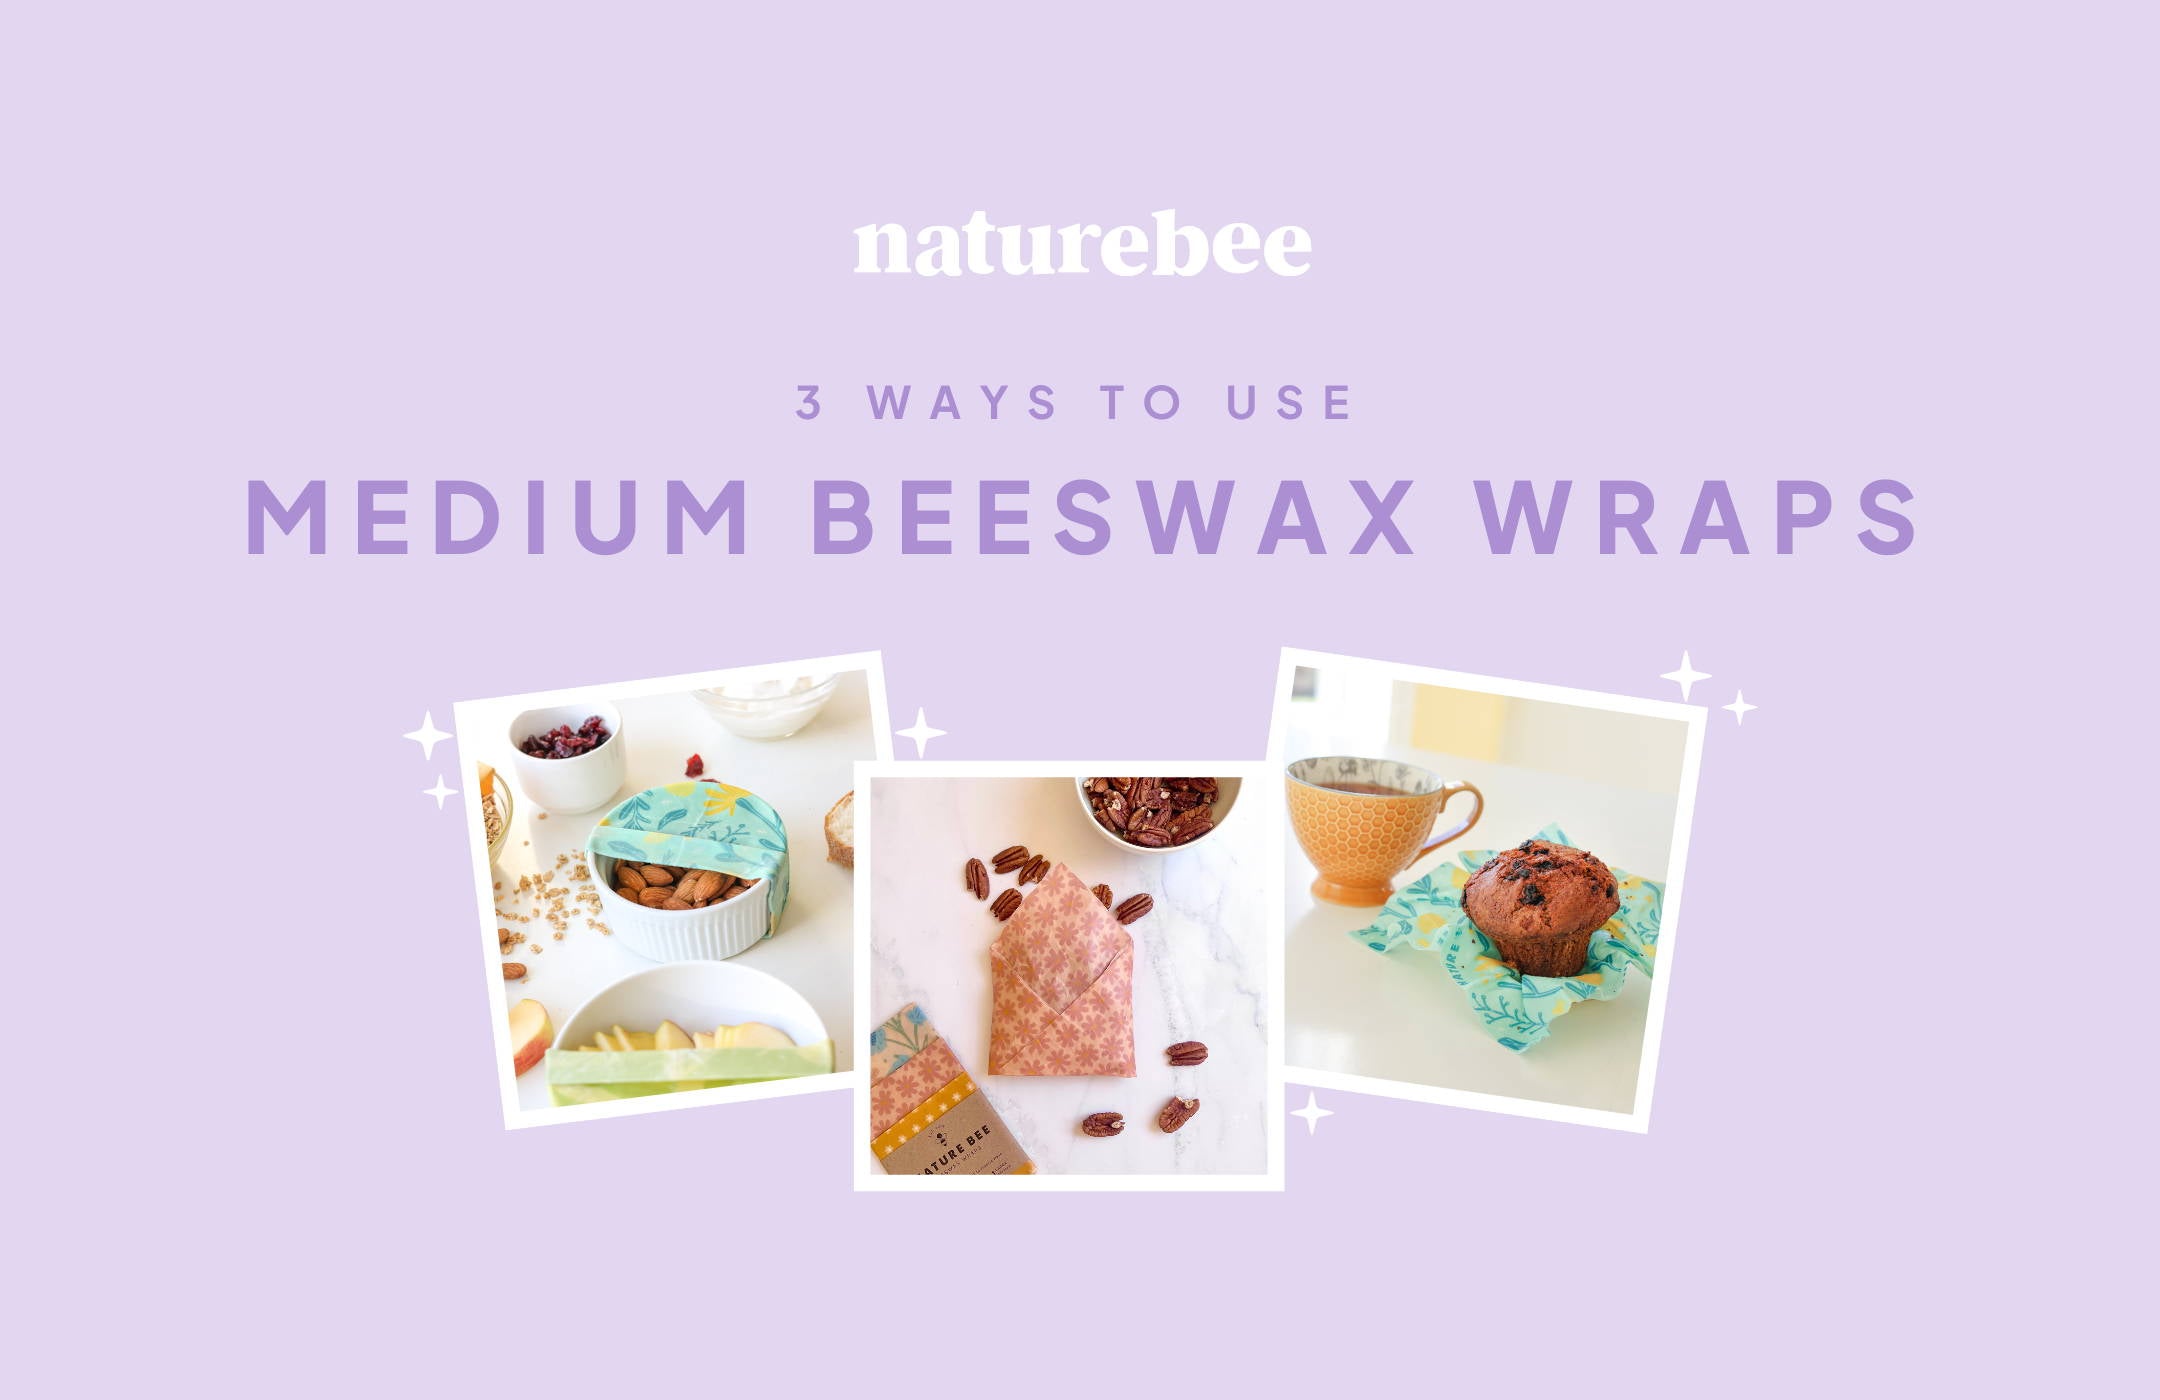 Making Beeswax Wraps - CHOOKTOPIA®